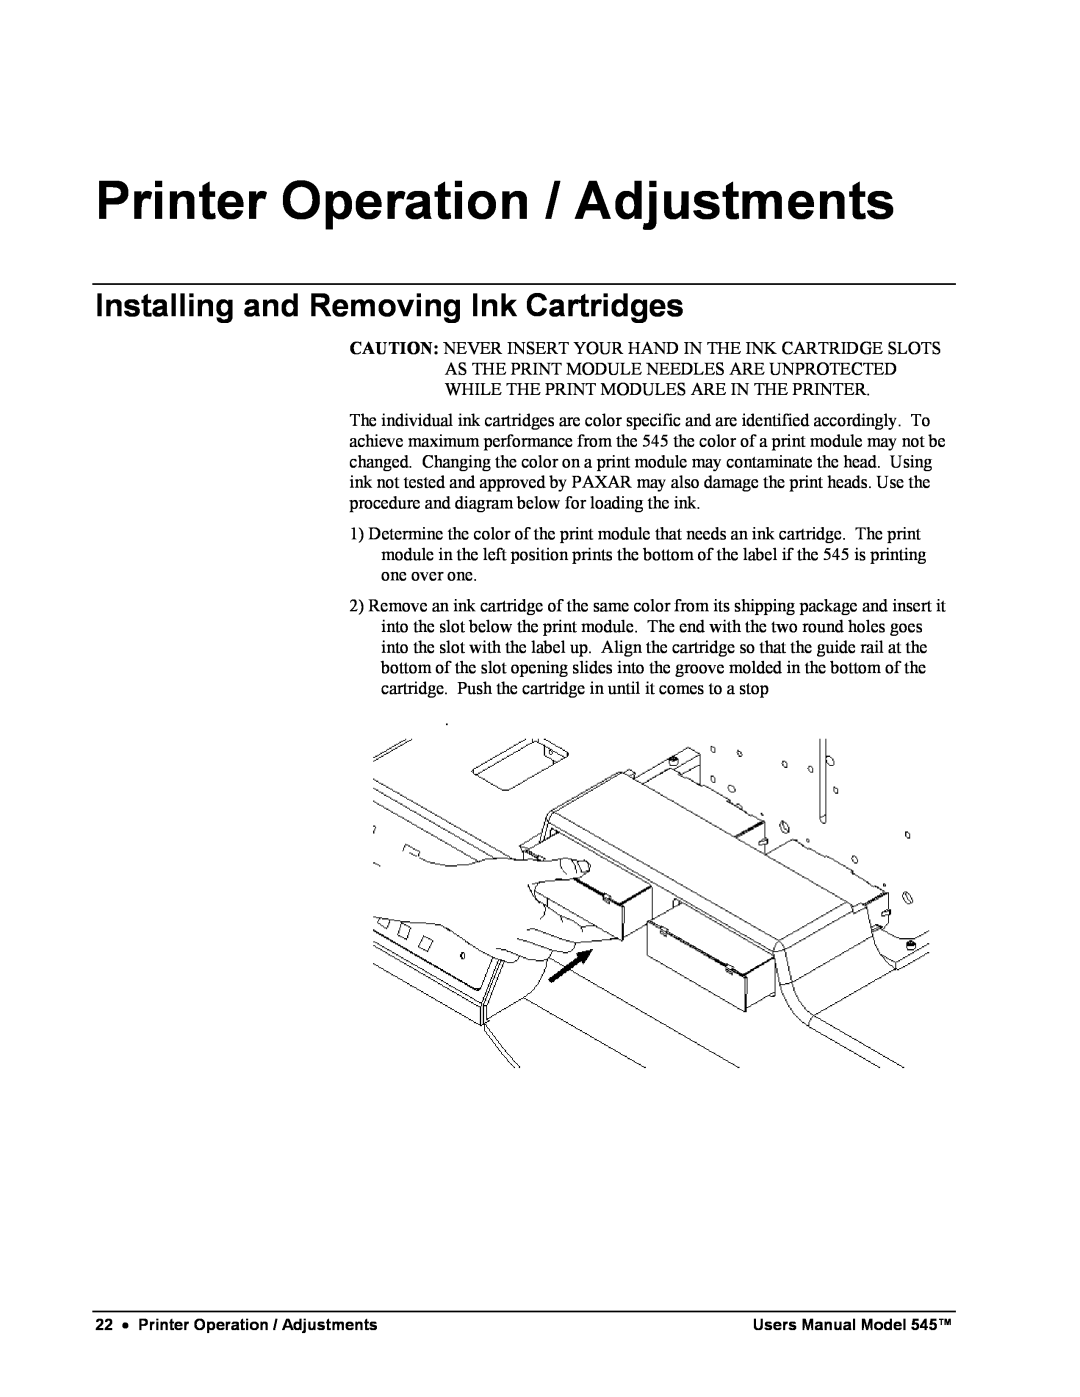 Paxar 545 user manual Printer Operation / Adjustments, Installing and Removing Ink Cartridges 